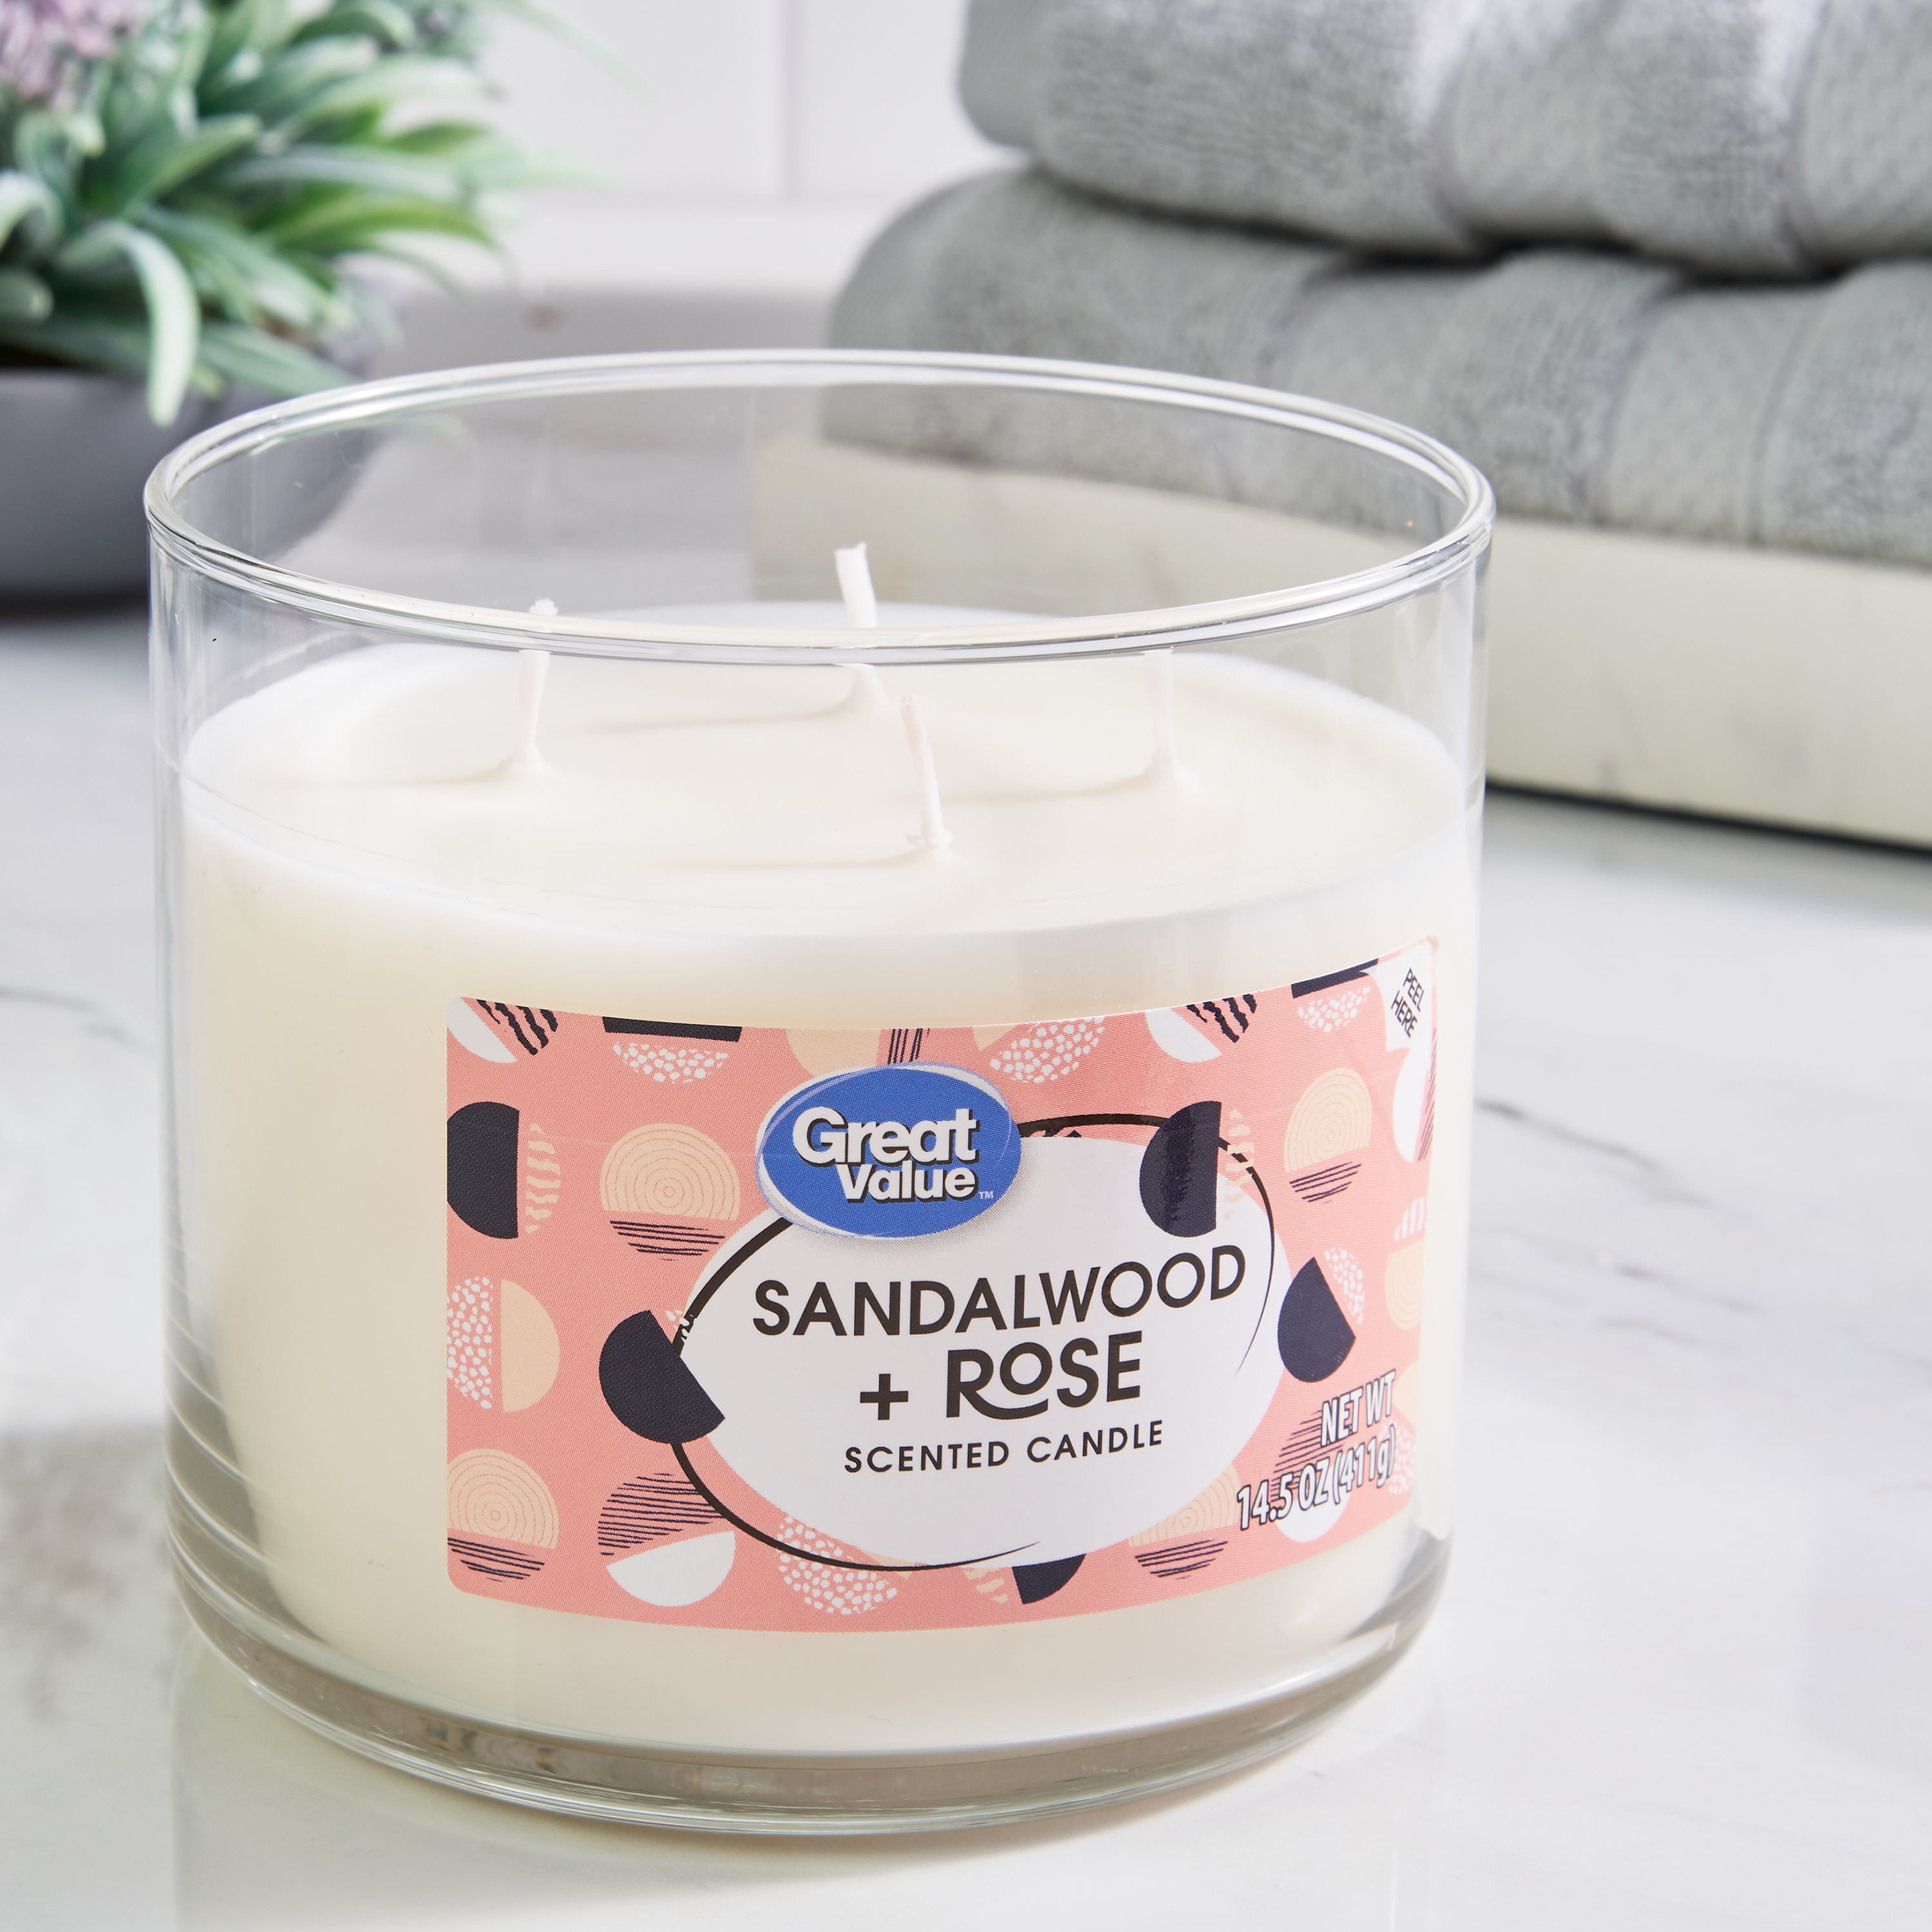 A sandalwood- and rose-scented candle with four wicks